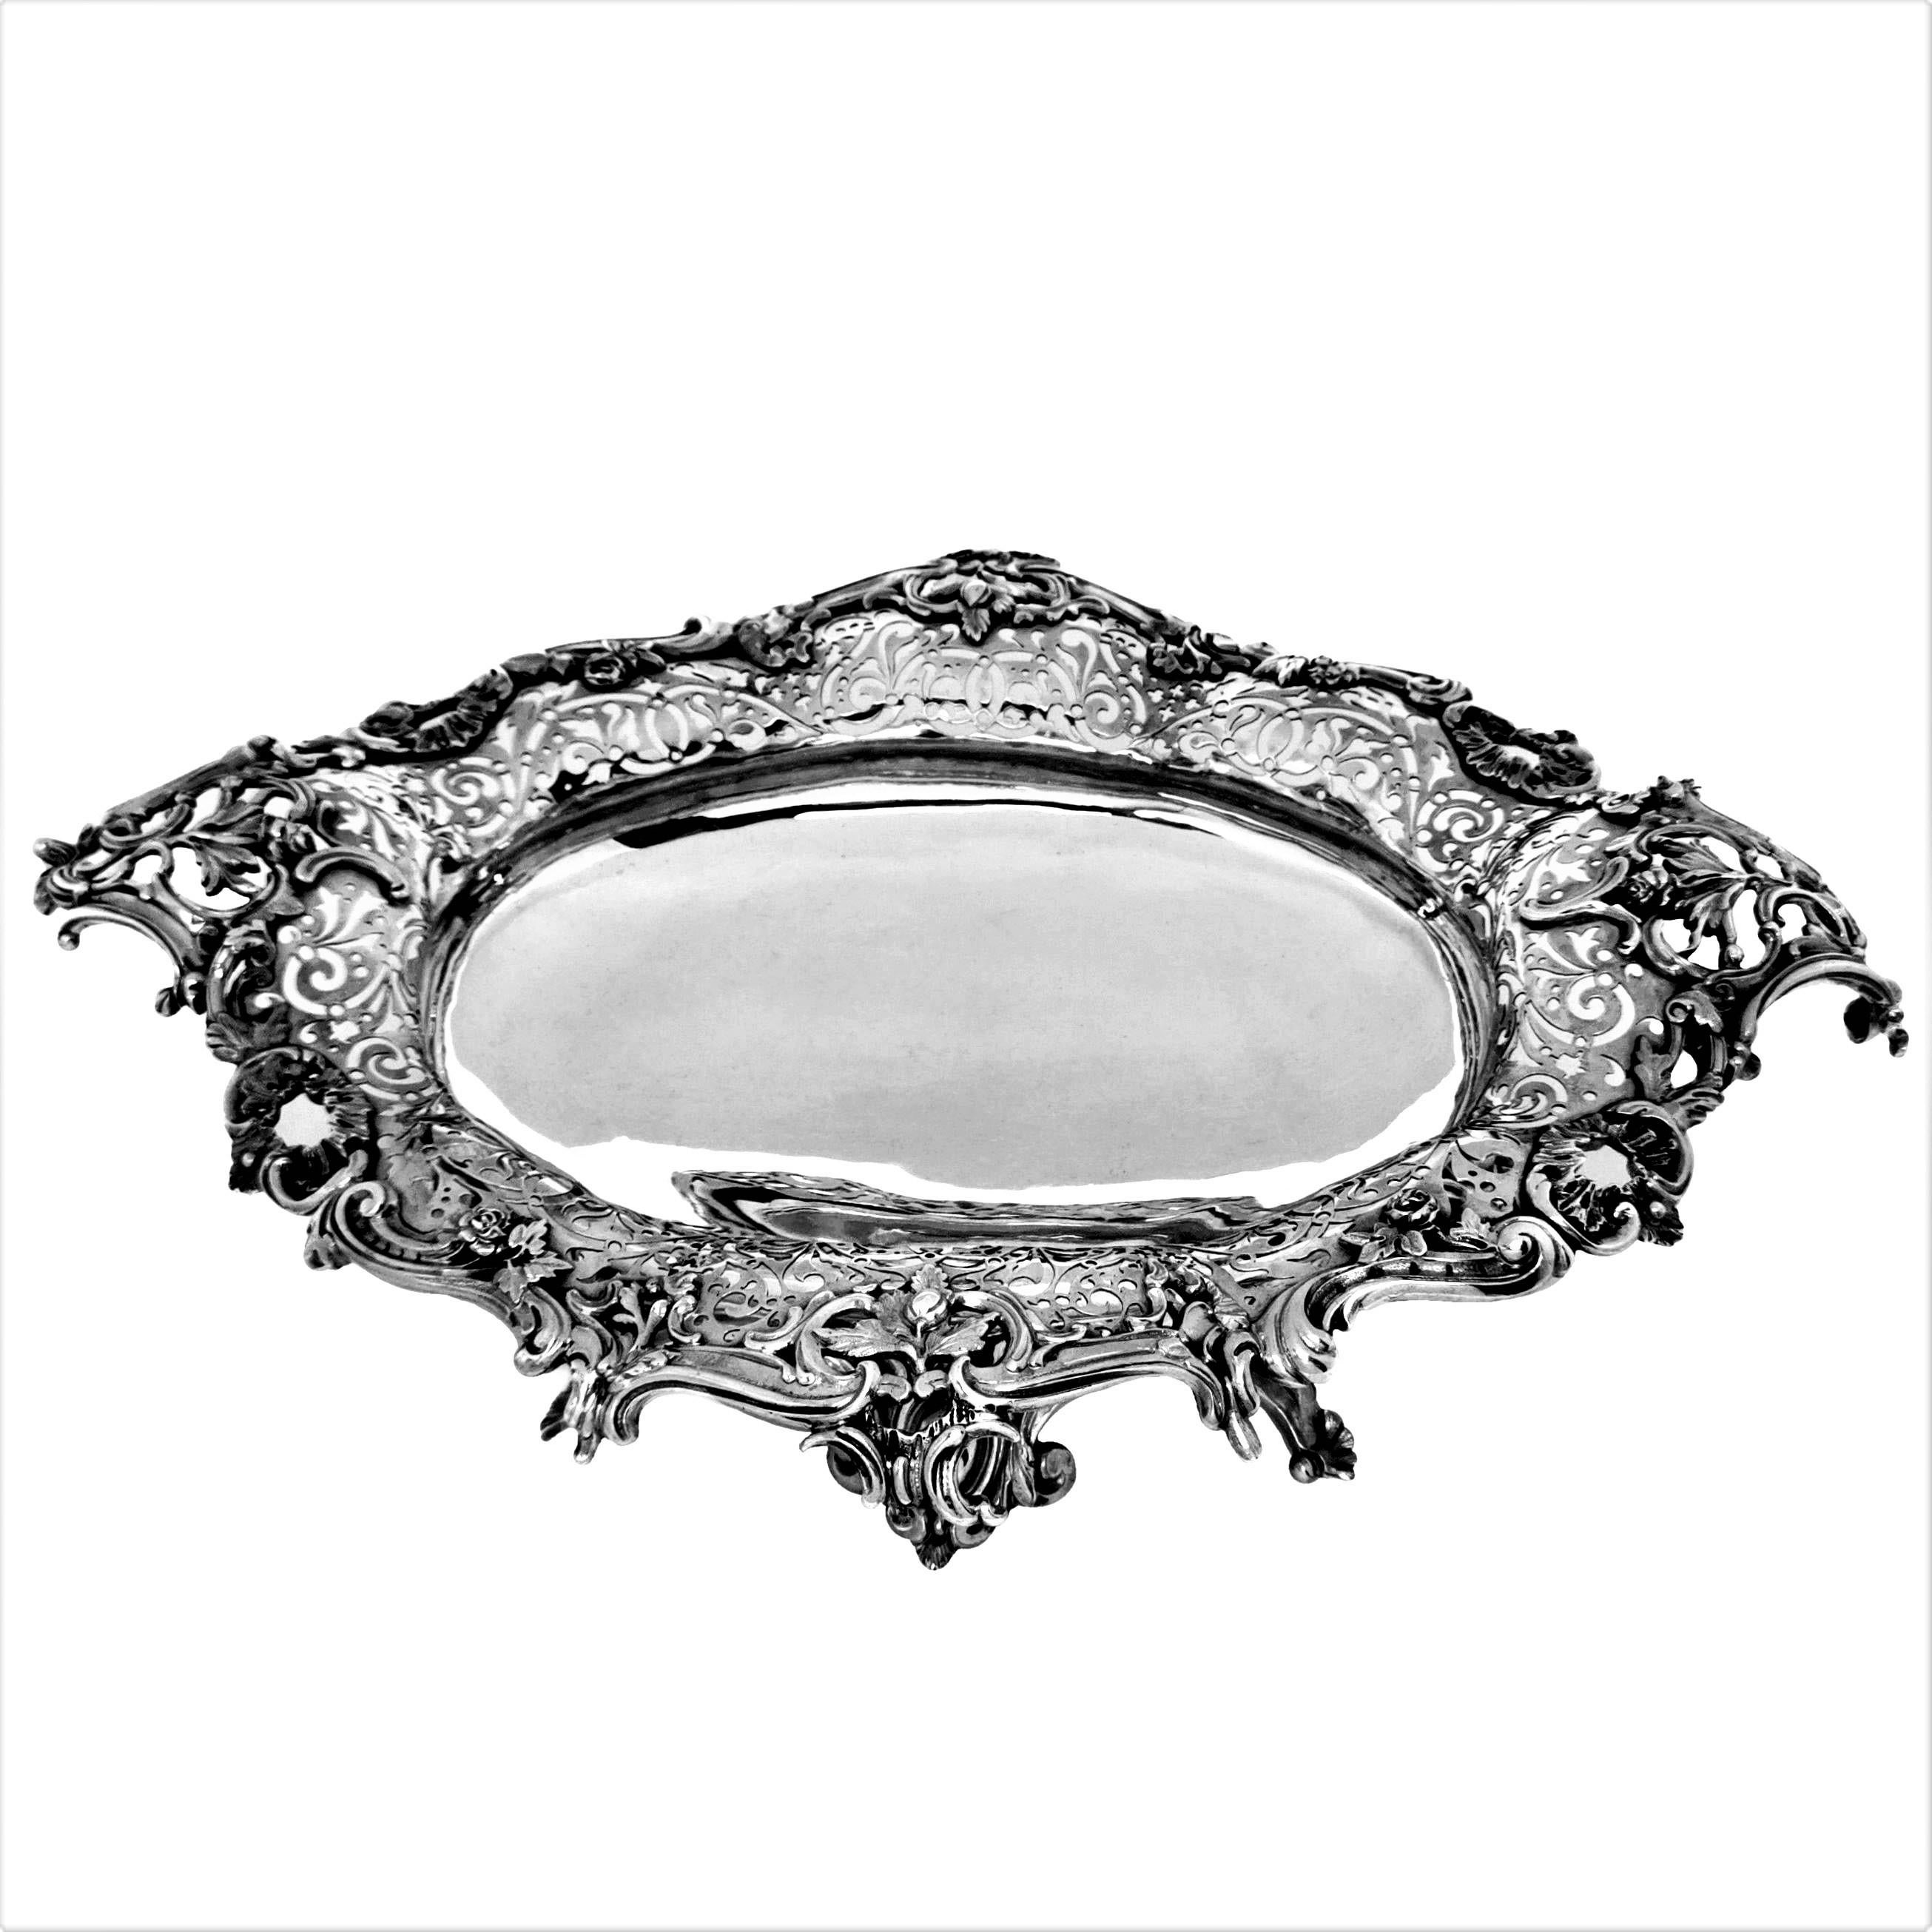 A magnificent Antique Silver Dish / Bowl with a beautiful pierced design on the rim and an applied chased border. This Dish is of substantial size and is raised on eight feet to create an impressive statement piece large enough to be used as a